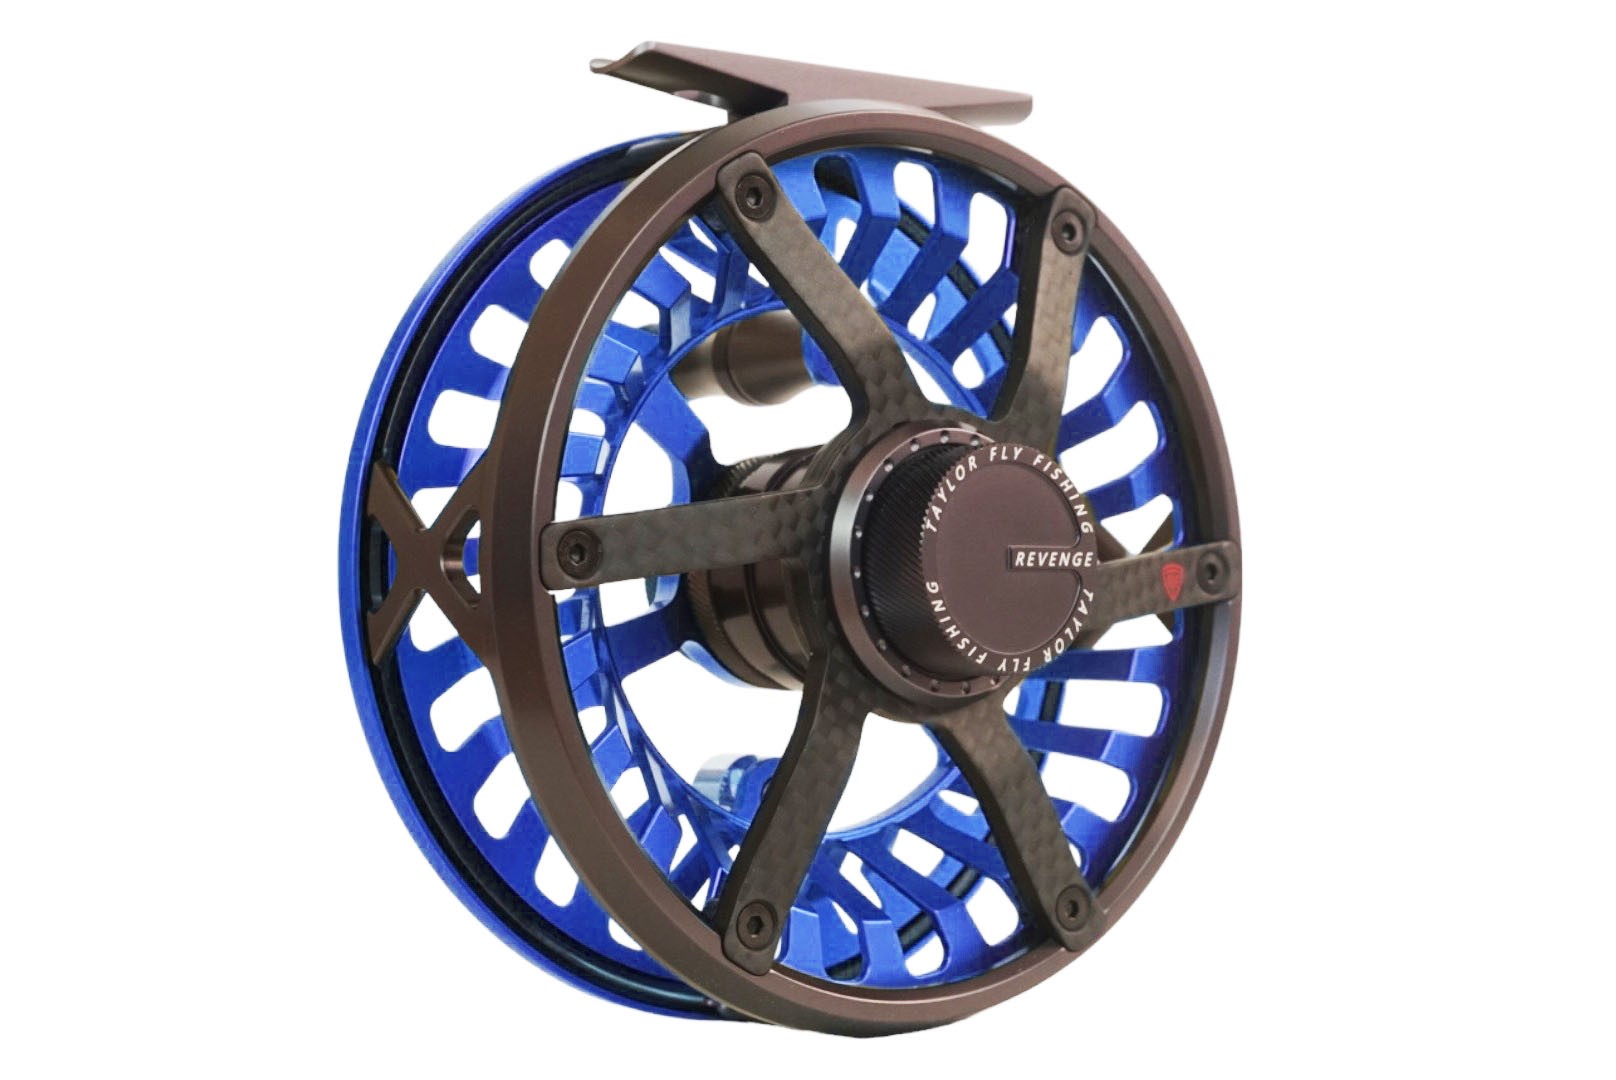 The new Taylor Reels Enigma ESD! Such a cool fly fishing reel